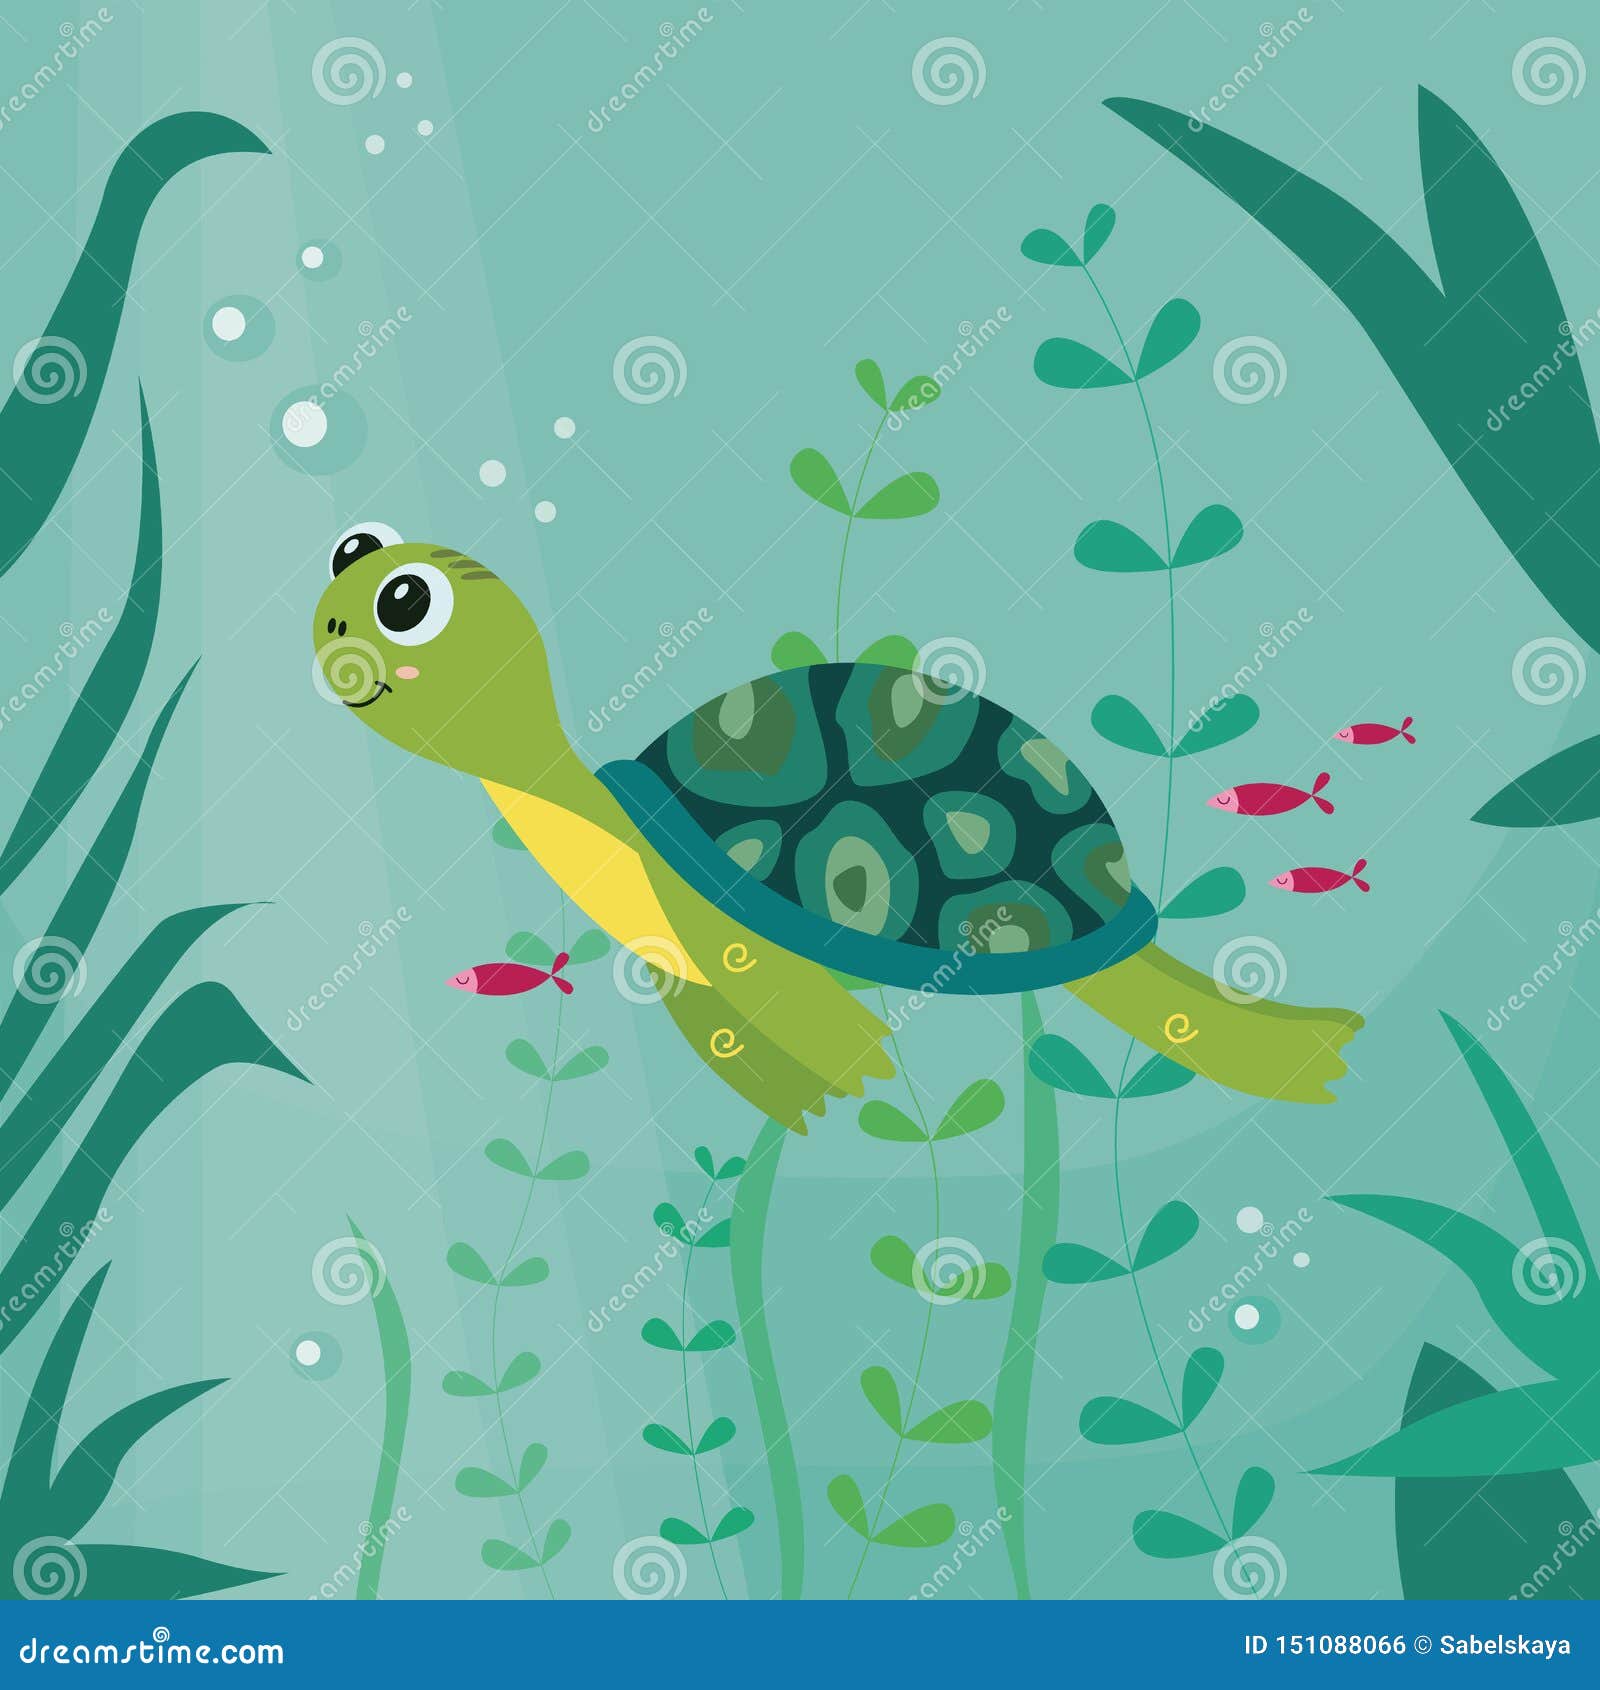 Cartoon Turtle Swimming the Vector Illustration on the Underwater  Background. Stock Vector - Illustration of graphic, smile: 151088066